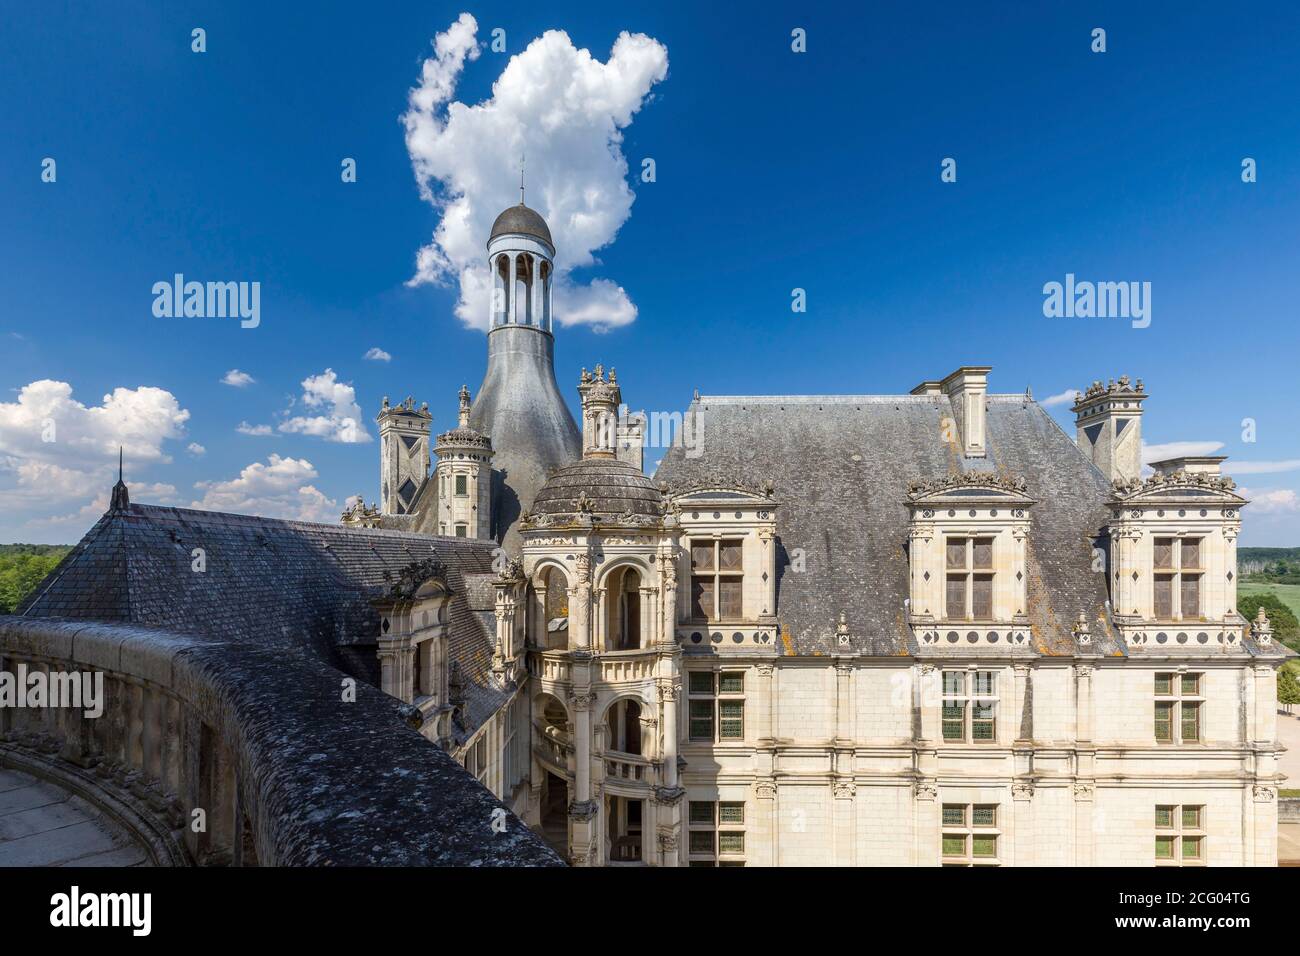 France, Loire et Cher, Loire valley listed as World Heritage by UNESCO, Chambord, the castle of Chambord, built between 1519 and 1538, Renaissance sty Stock Photo